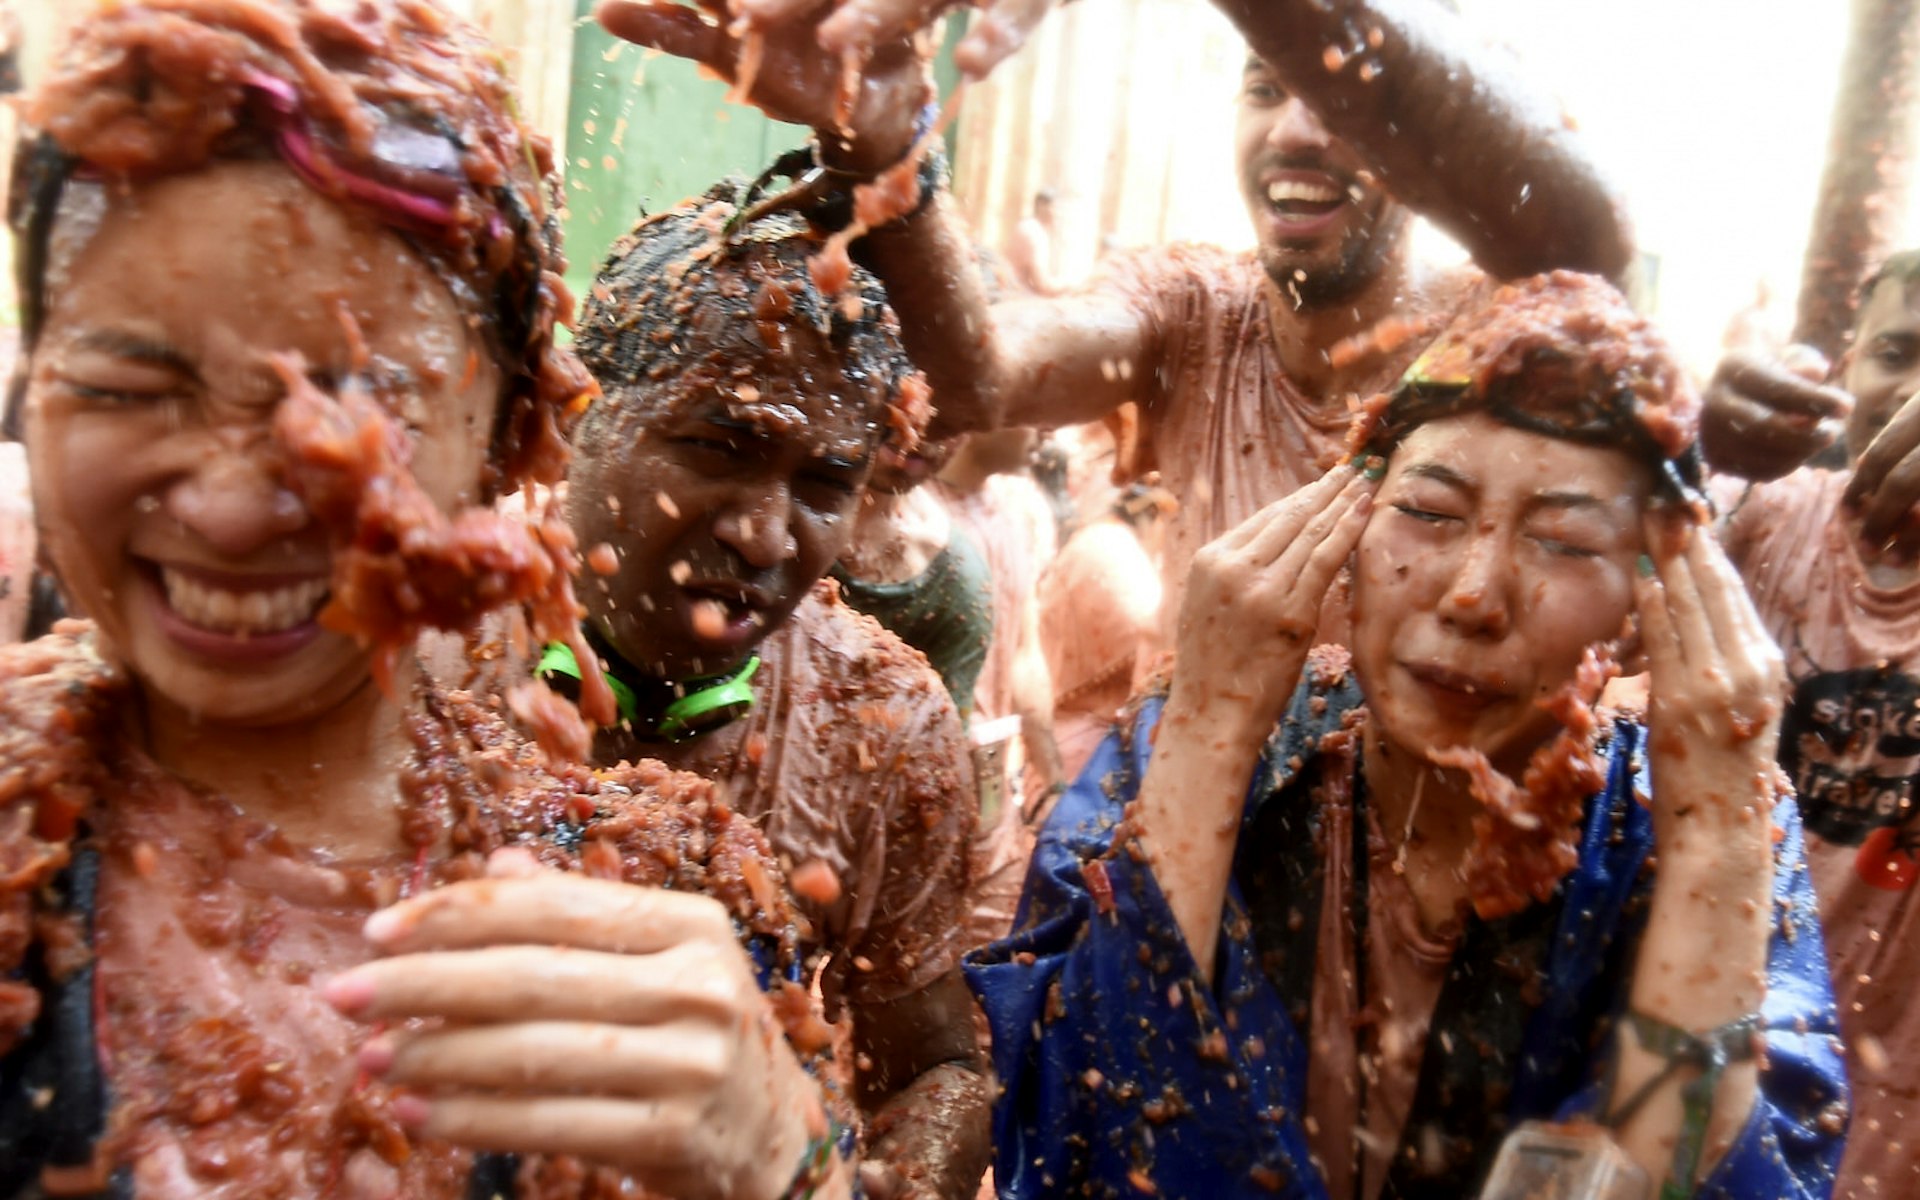 Revellers are covered with smashed tomato puree during the 'Tomatina' festival in Bunol. Everyone in the photo is being splattered with tomato pulp and squinting to try protect their eyes. It's pandemonium.